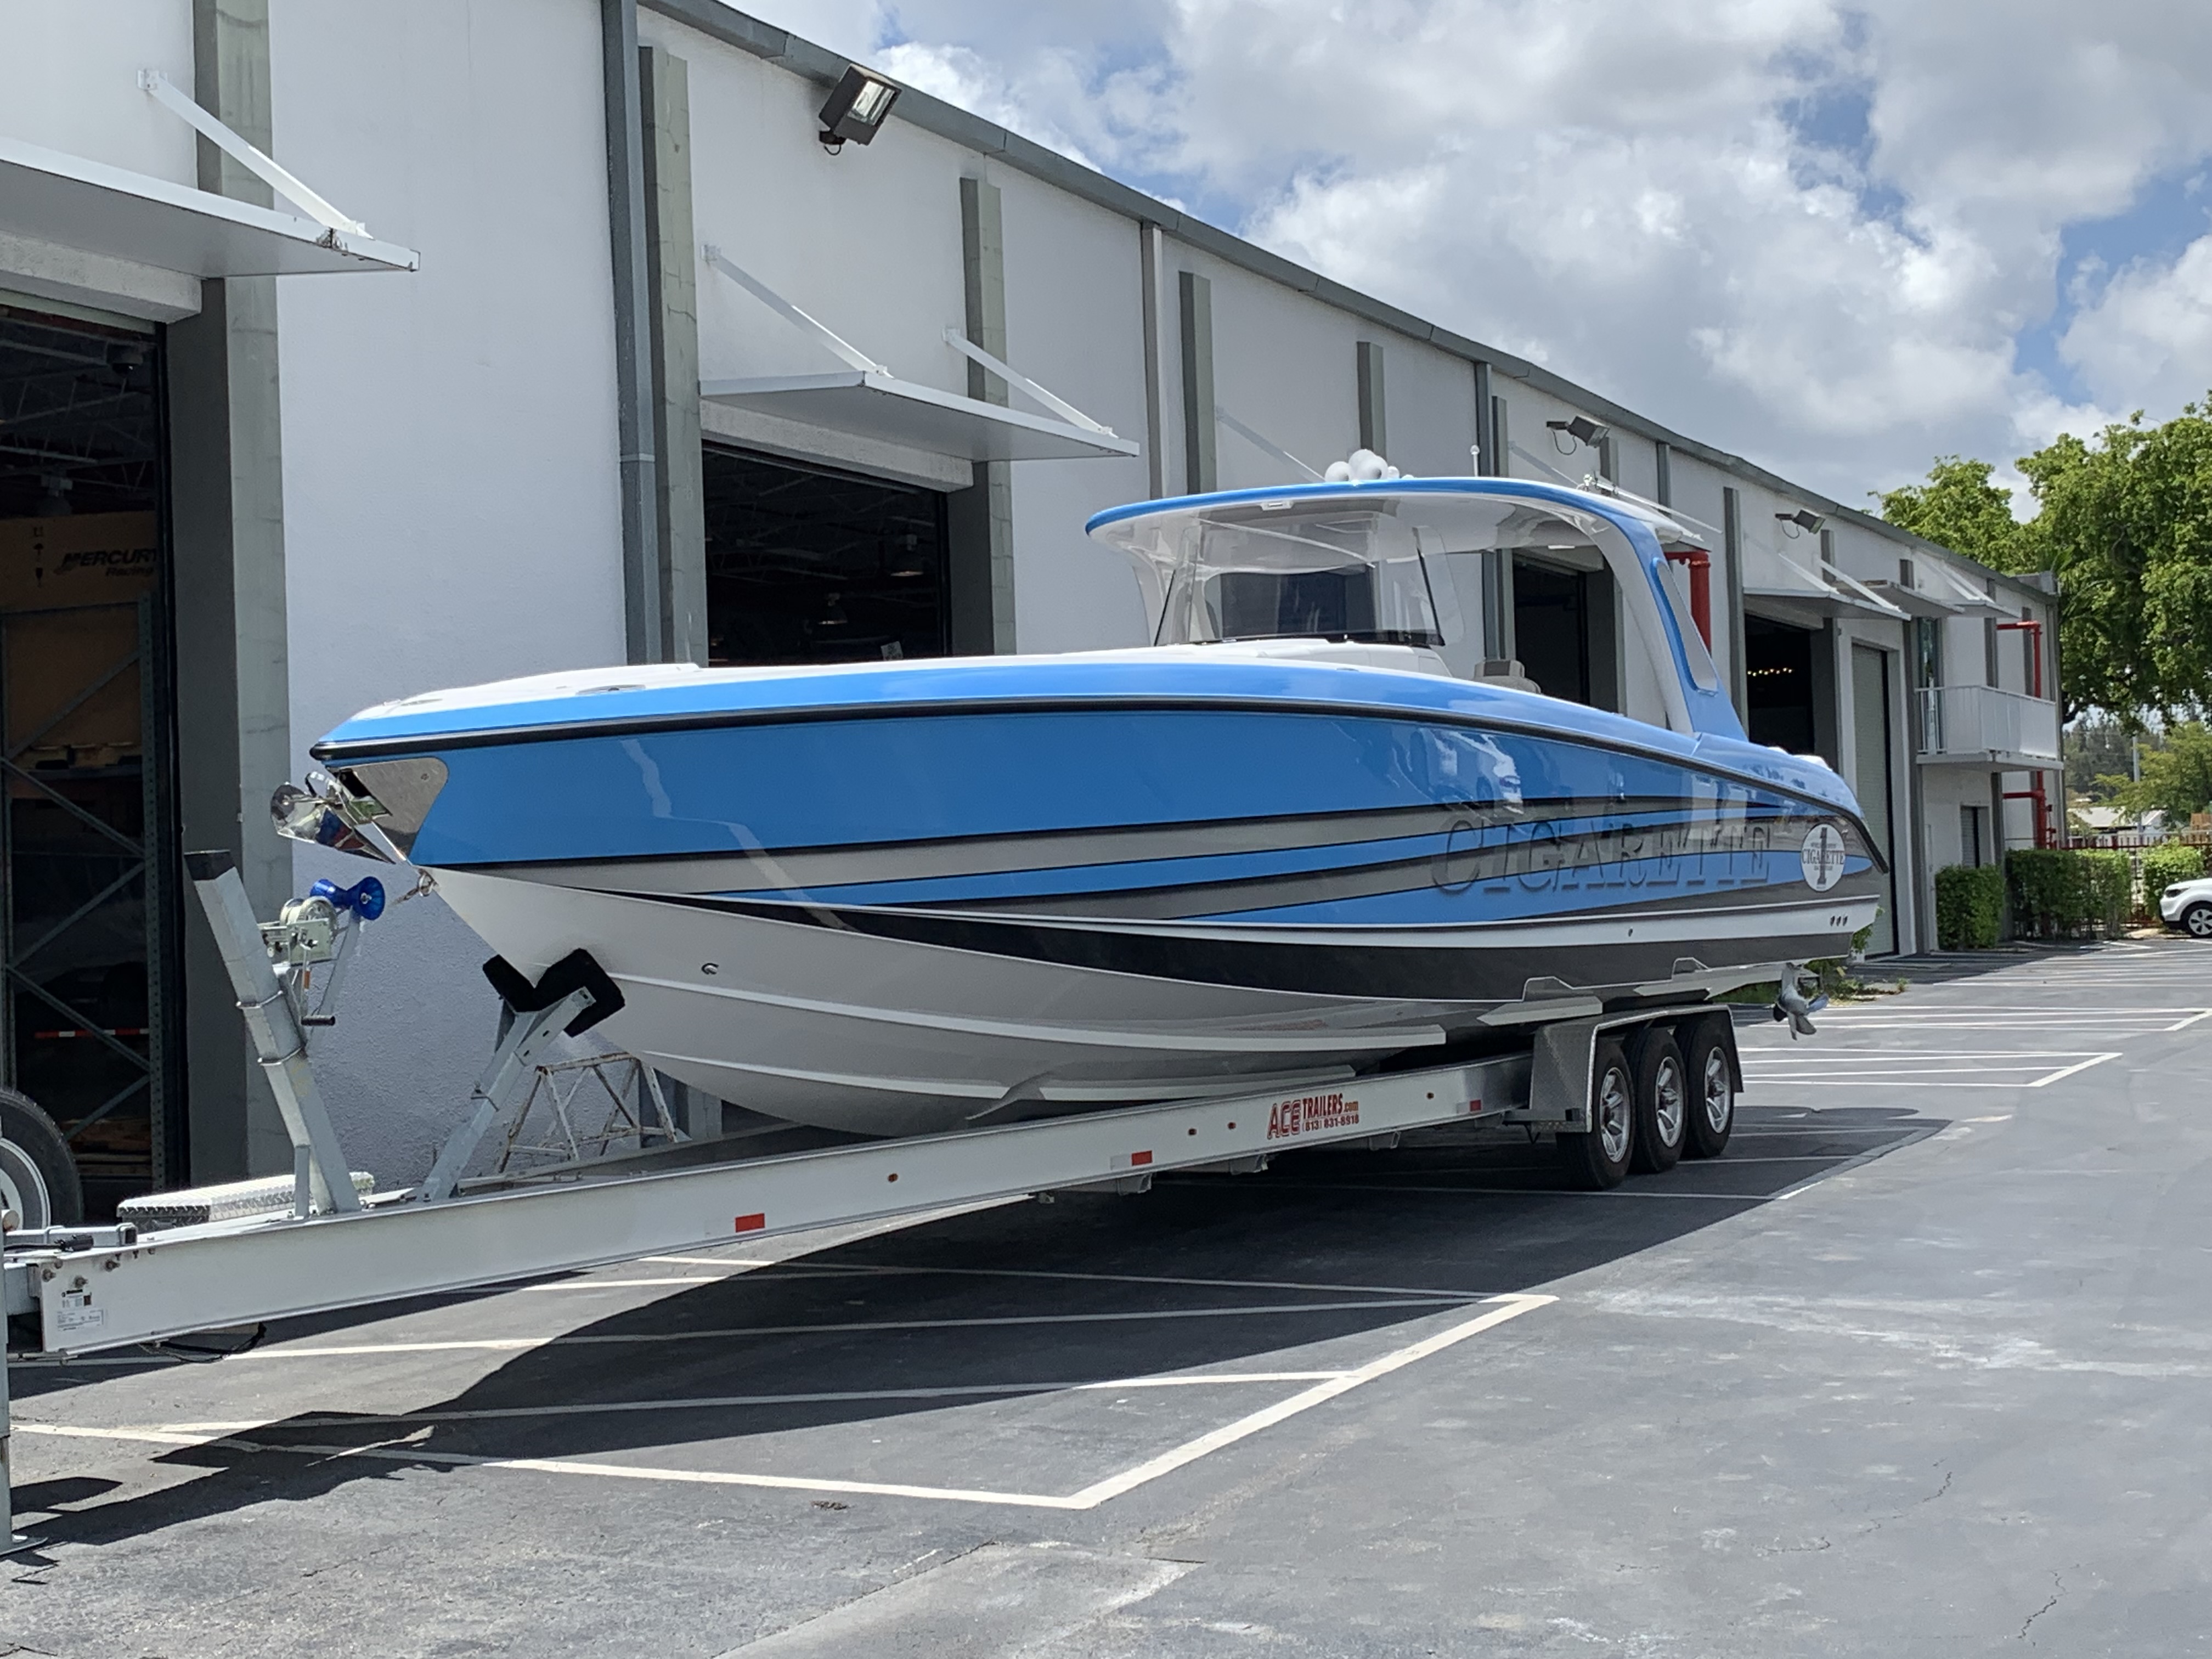 A1A Boat Transport